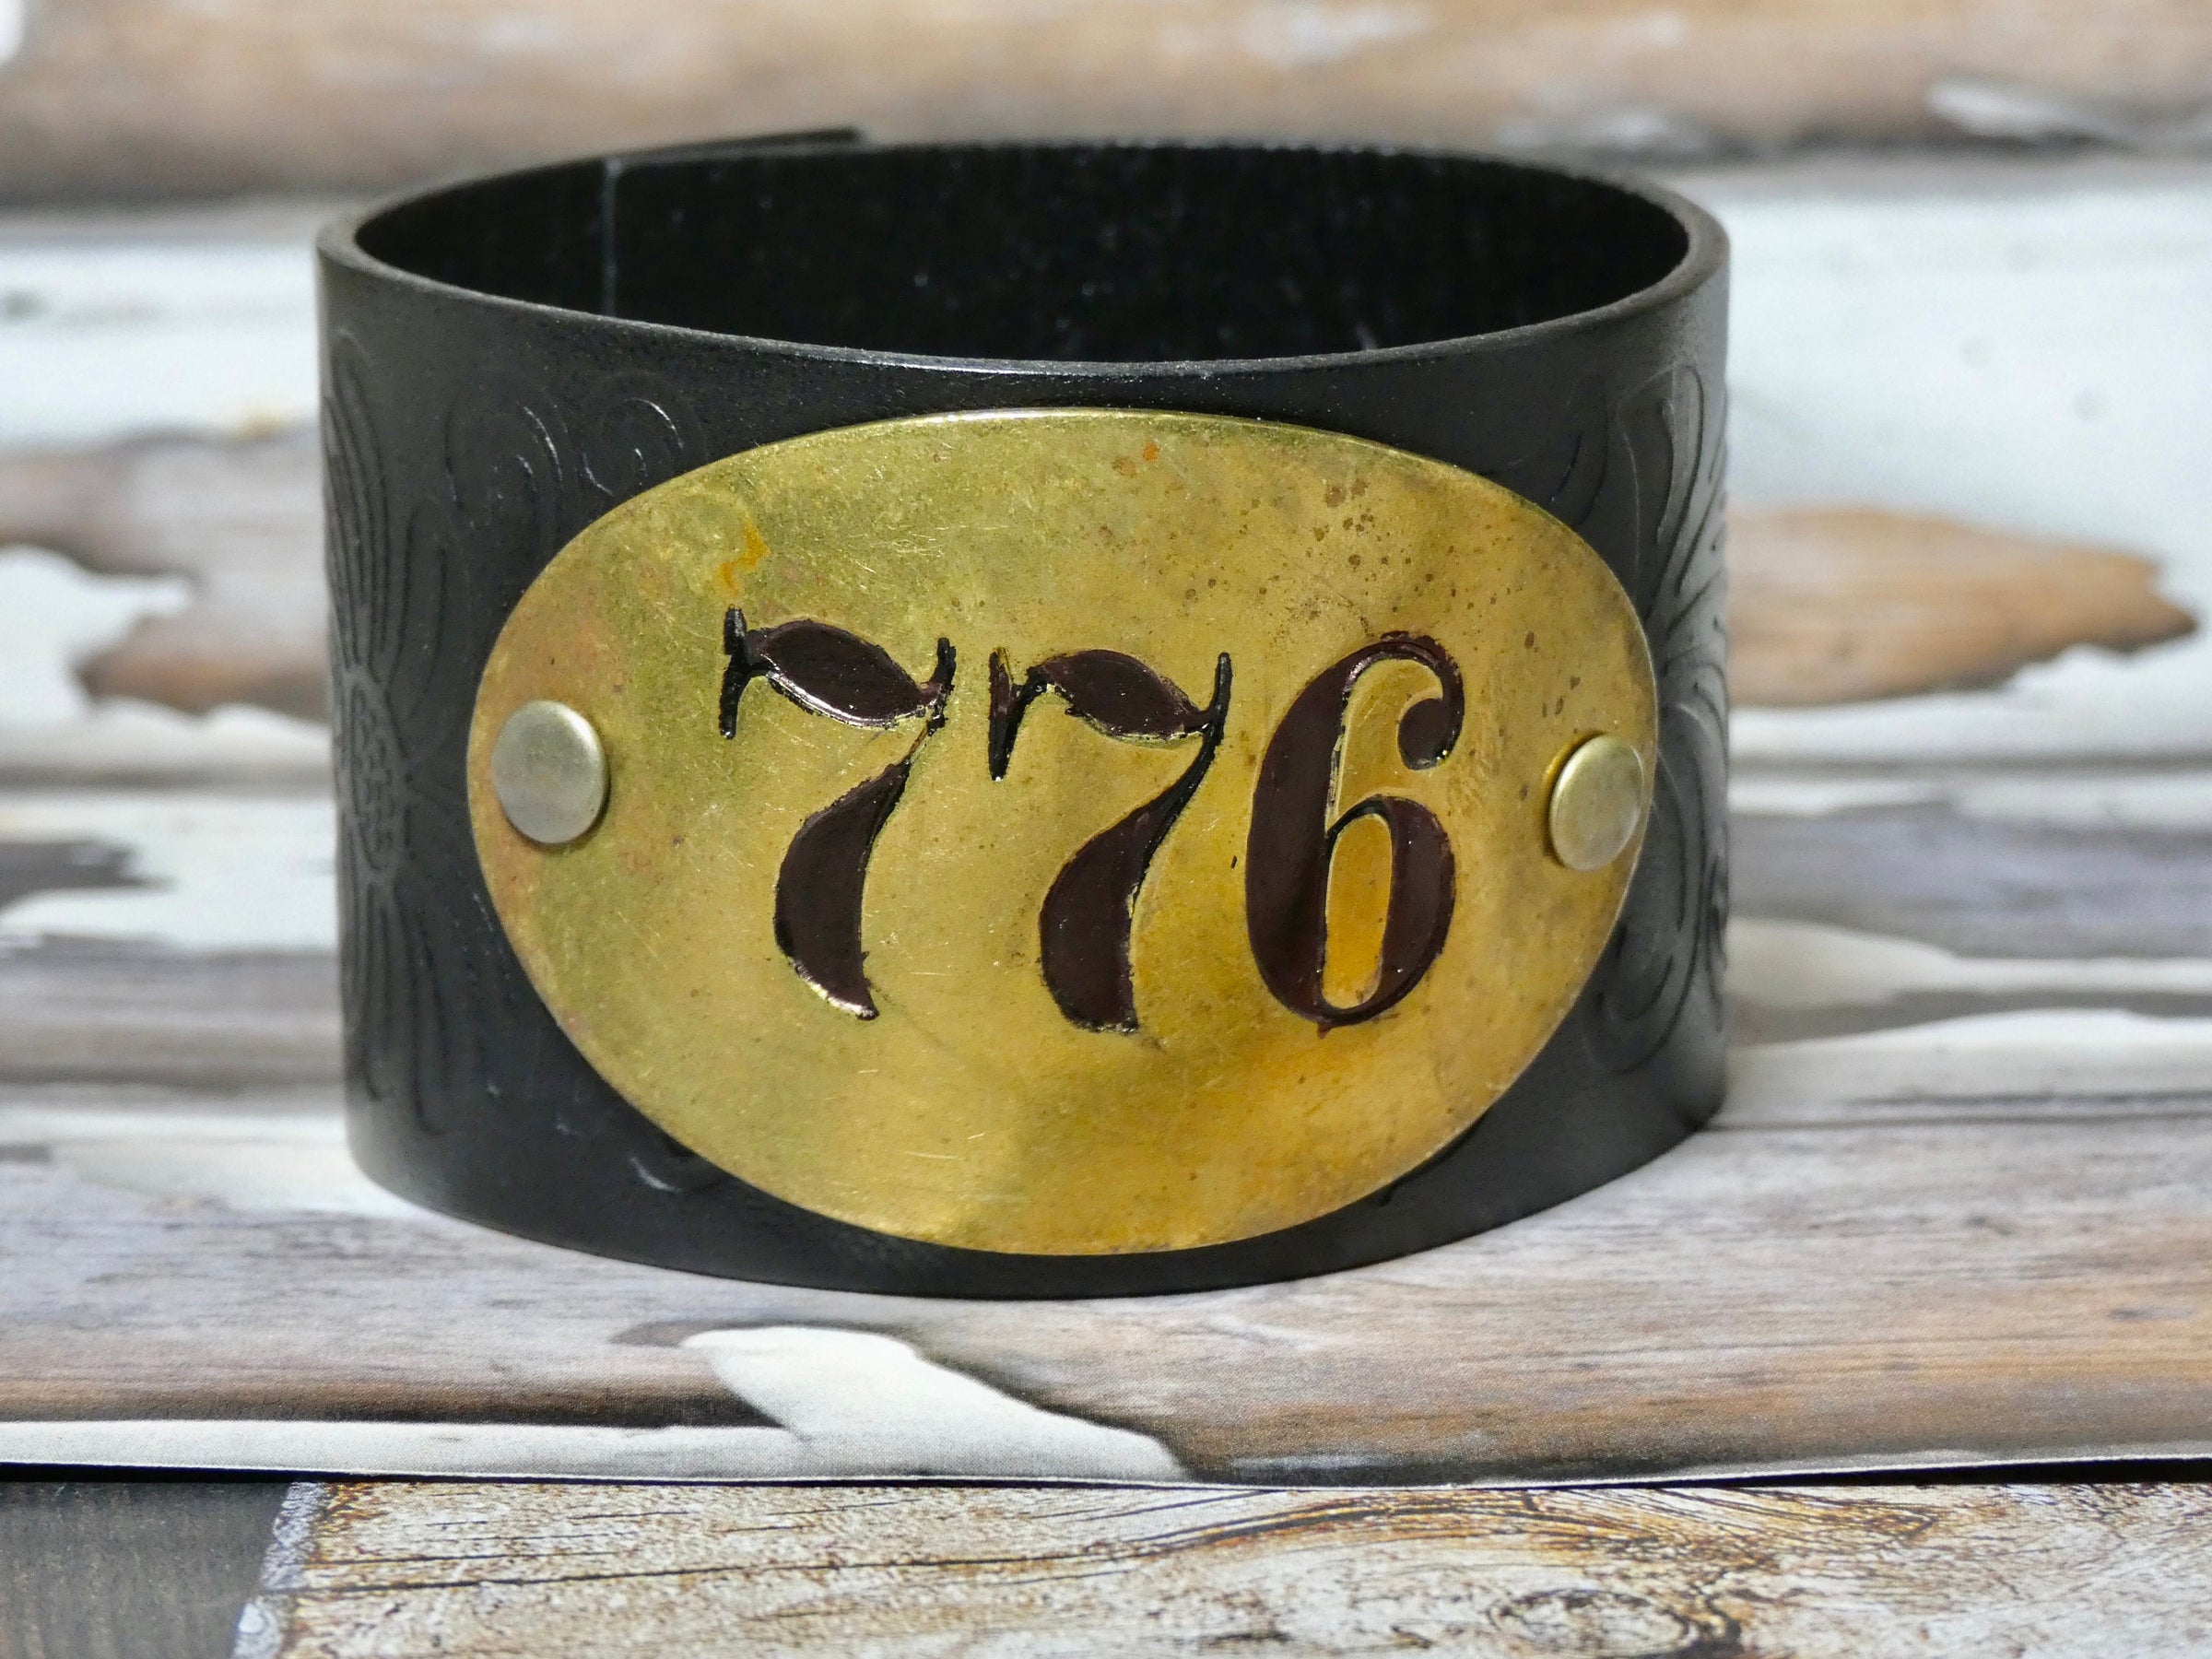 Leather Cuff Bracelet with Vintage Brass Locker Tag #776, Tooled Black Leather Cuff